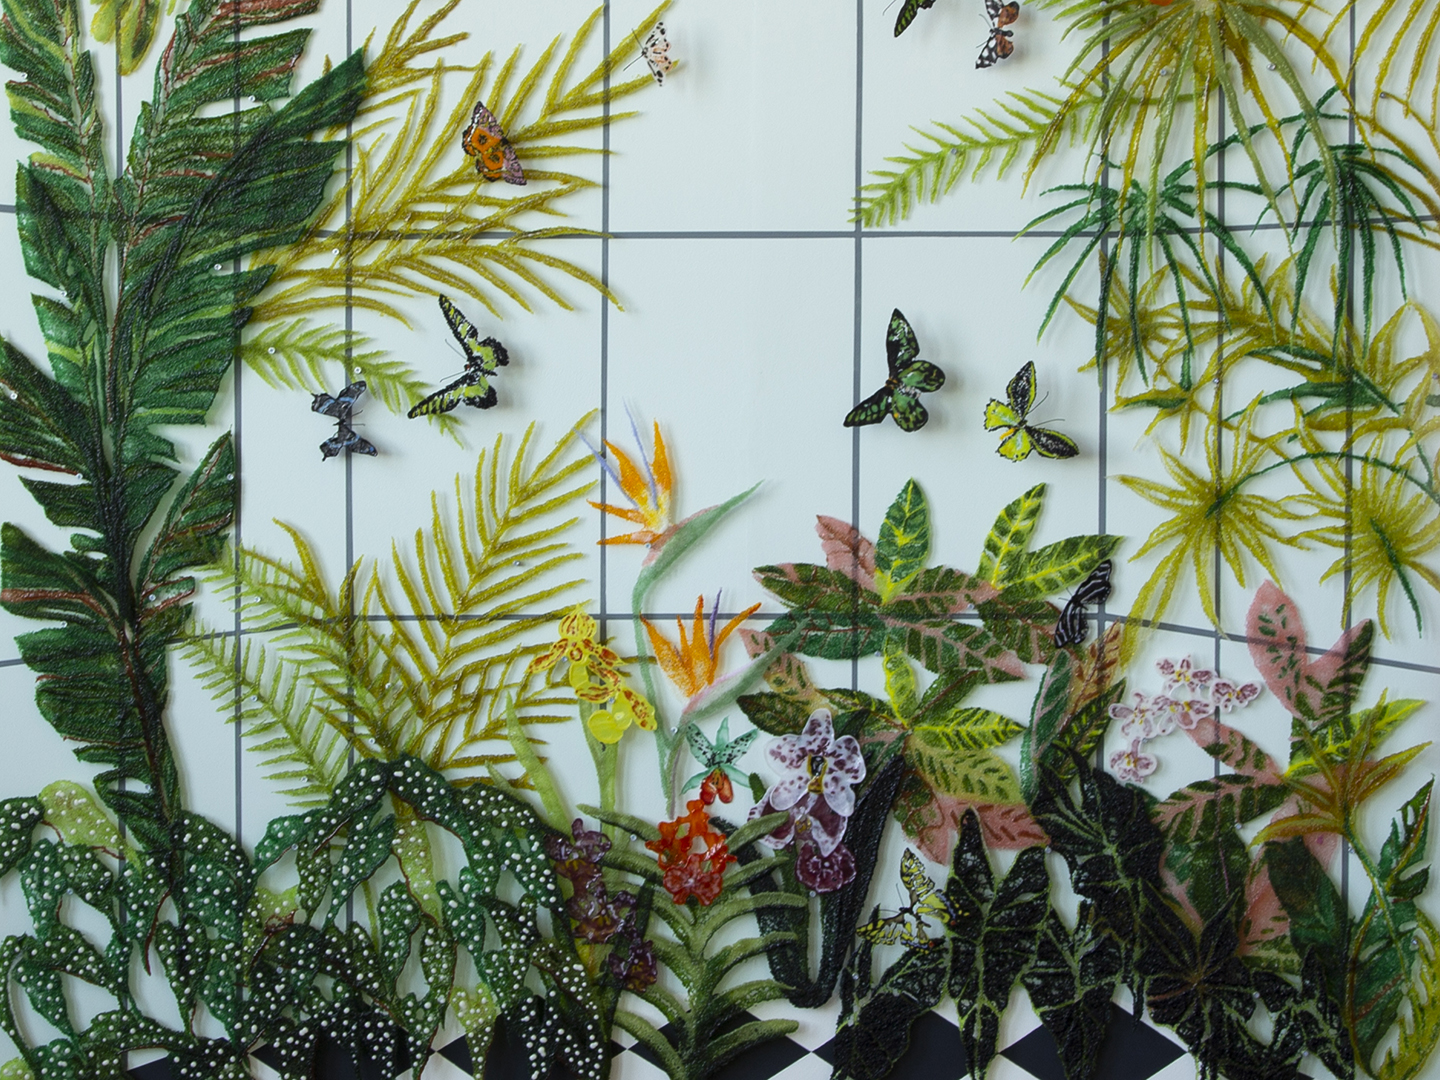 Detail photo of a glass artwork by Kate Clements depicting plants, flowers, and butterflies in a greenhouse.